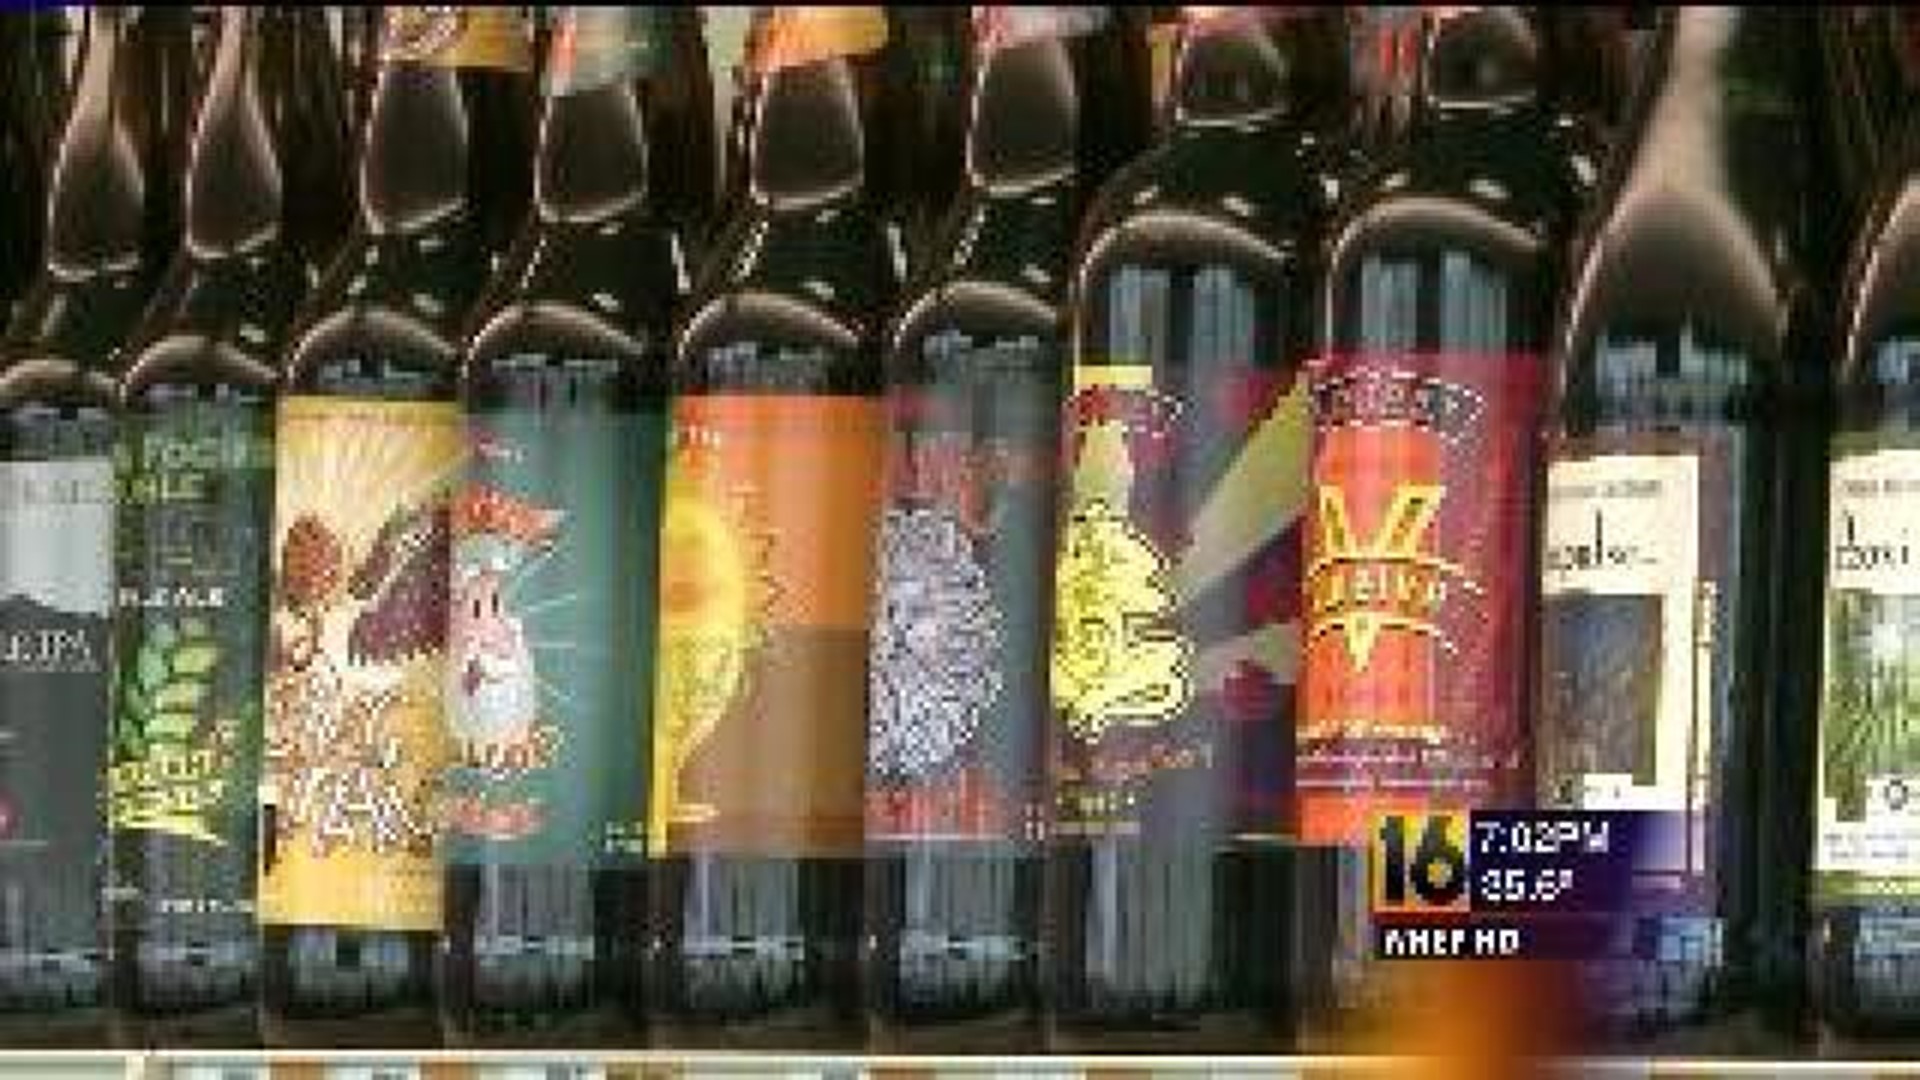 House Approves Liquor Law Changes